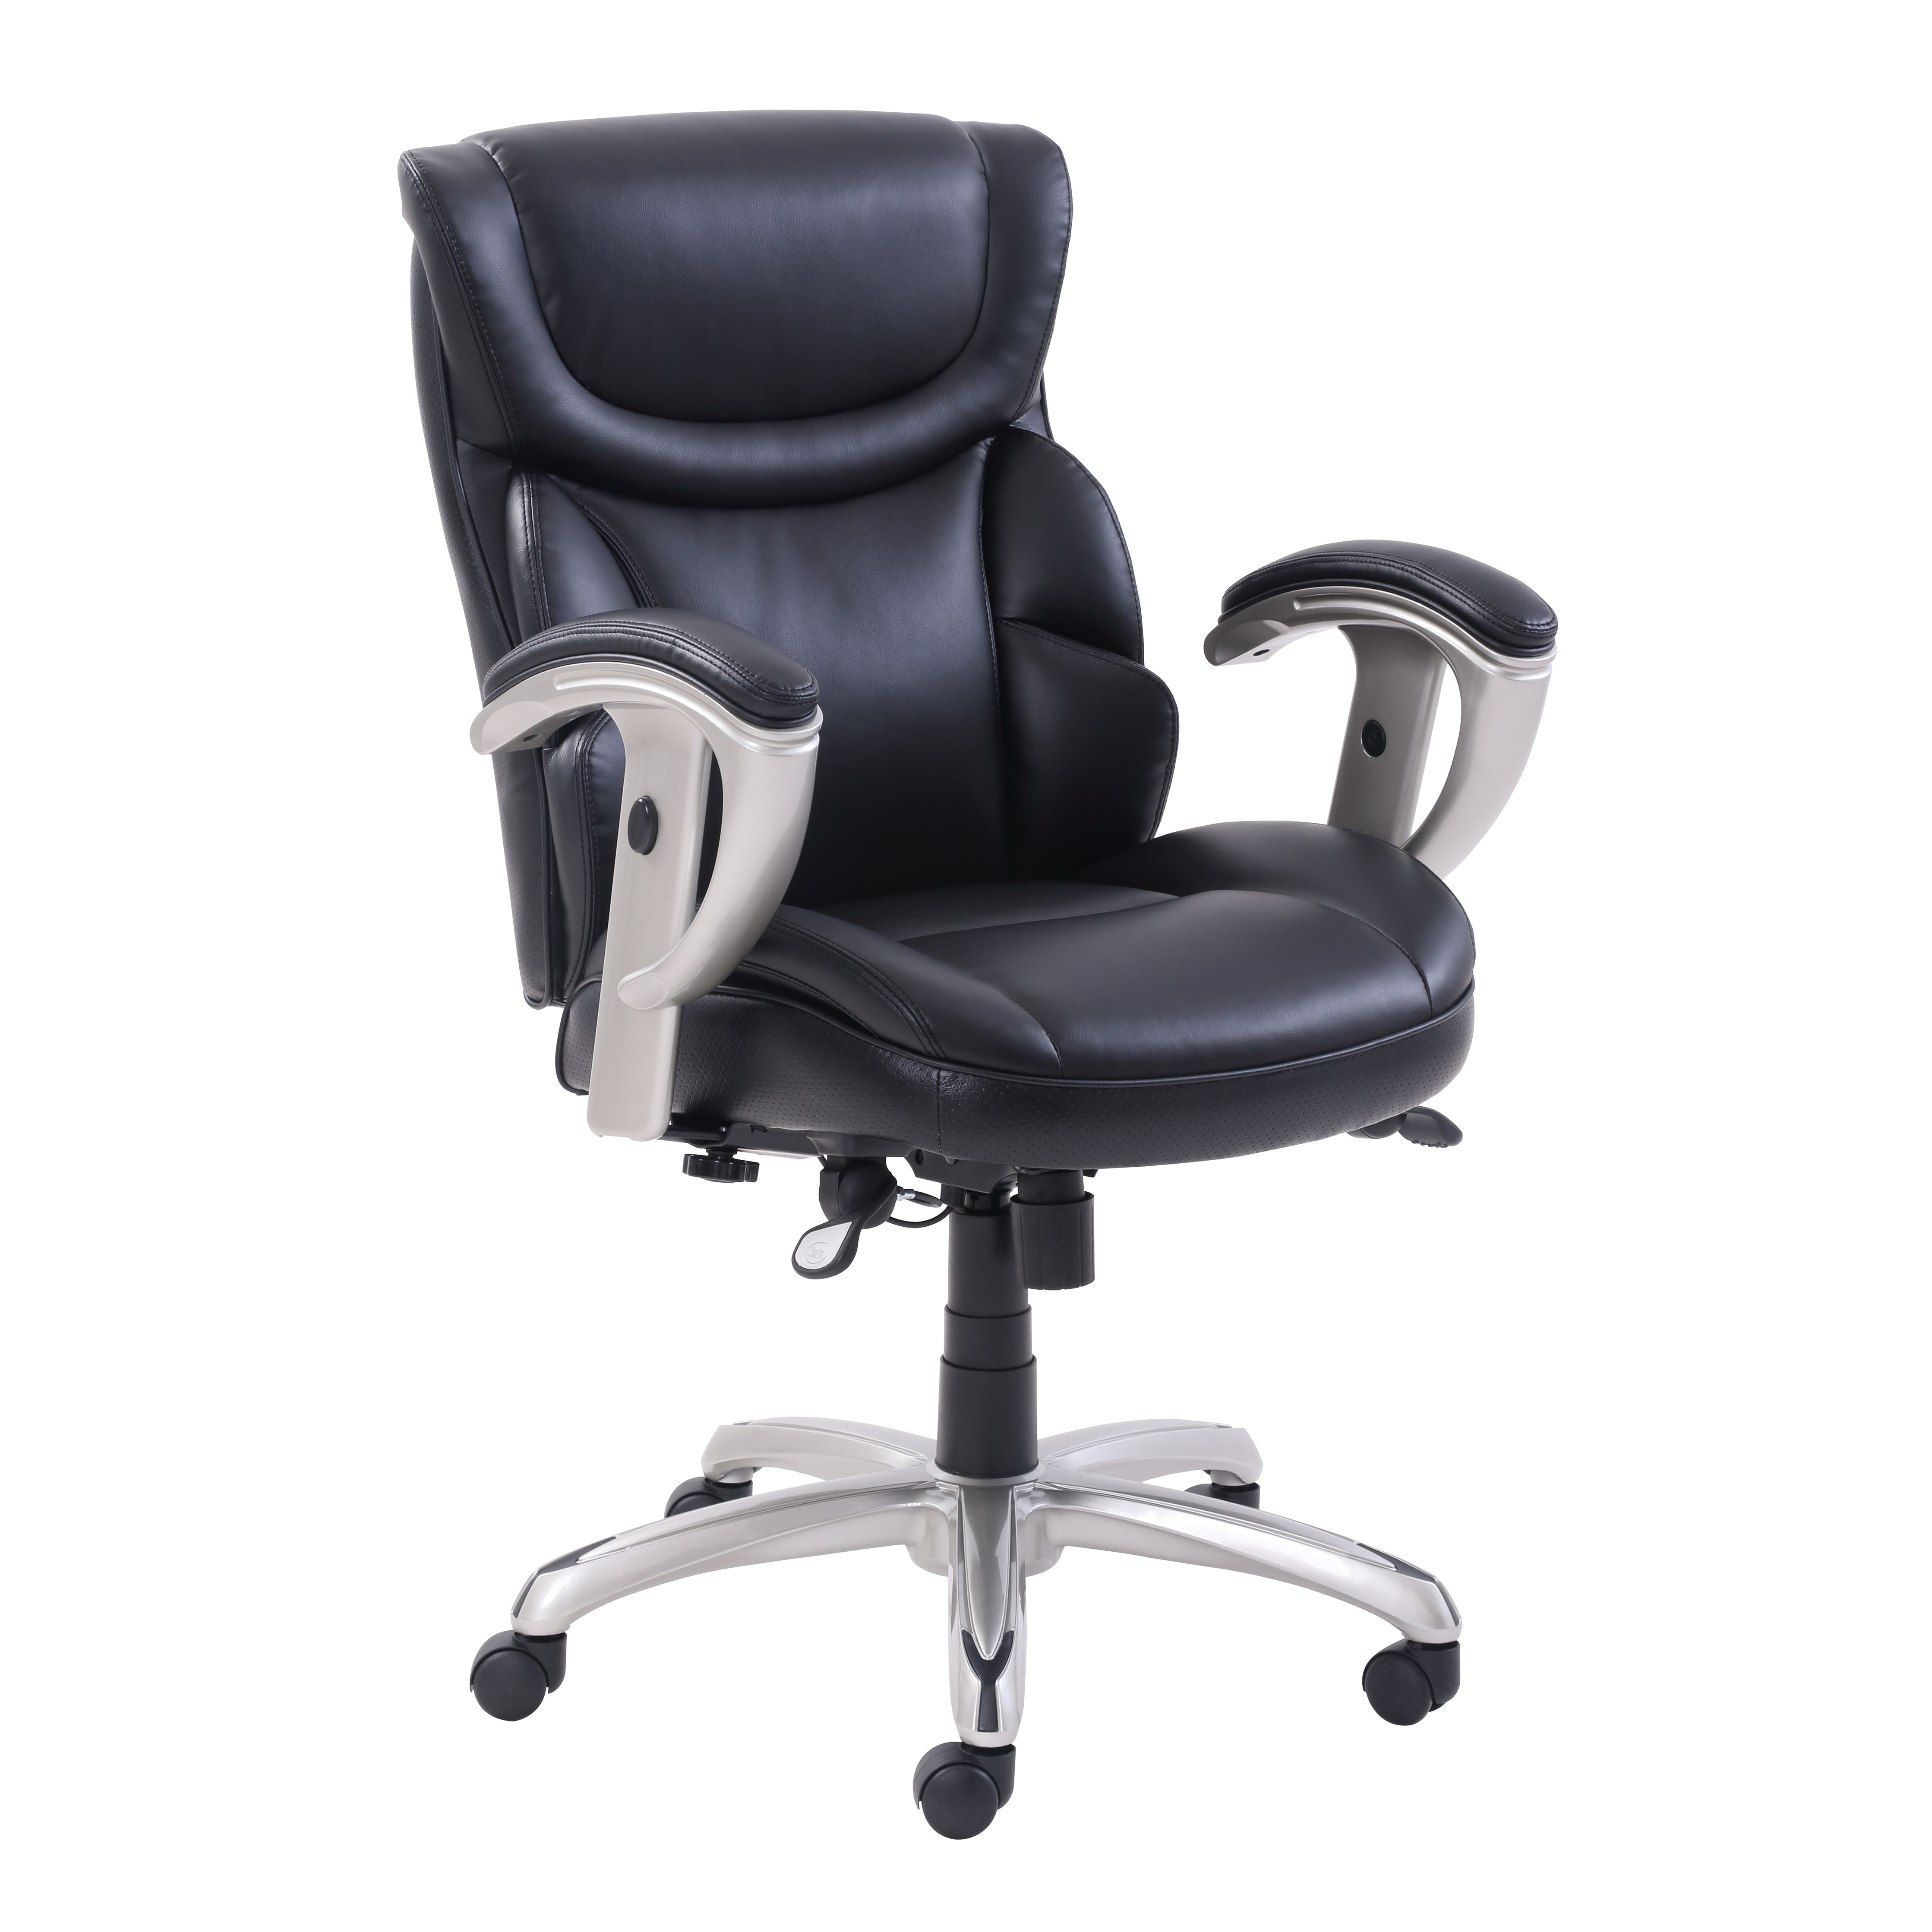  SertaPedic 49711BLK Emerson Task Chair, Supports up to 300 lbs., Black Seat/Black Back, Silver Base (SRJ49711BLK) 